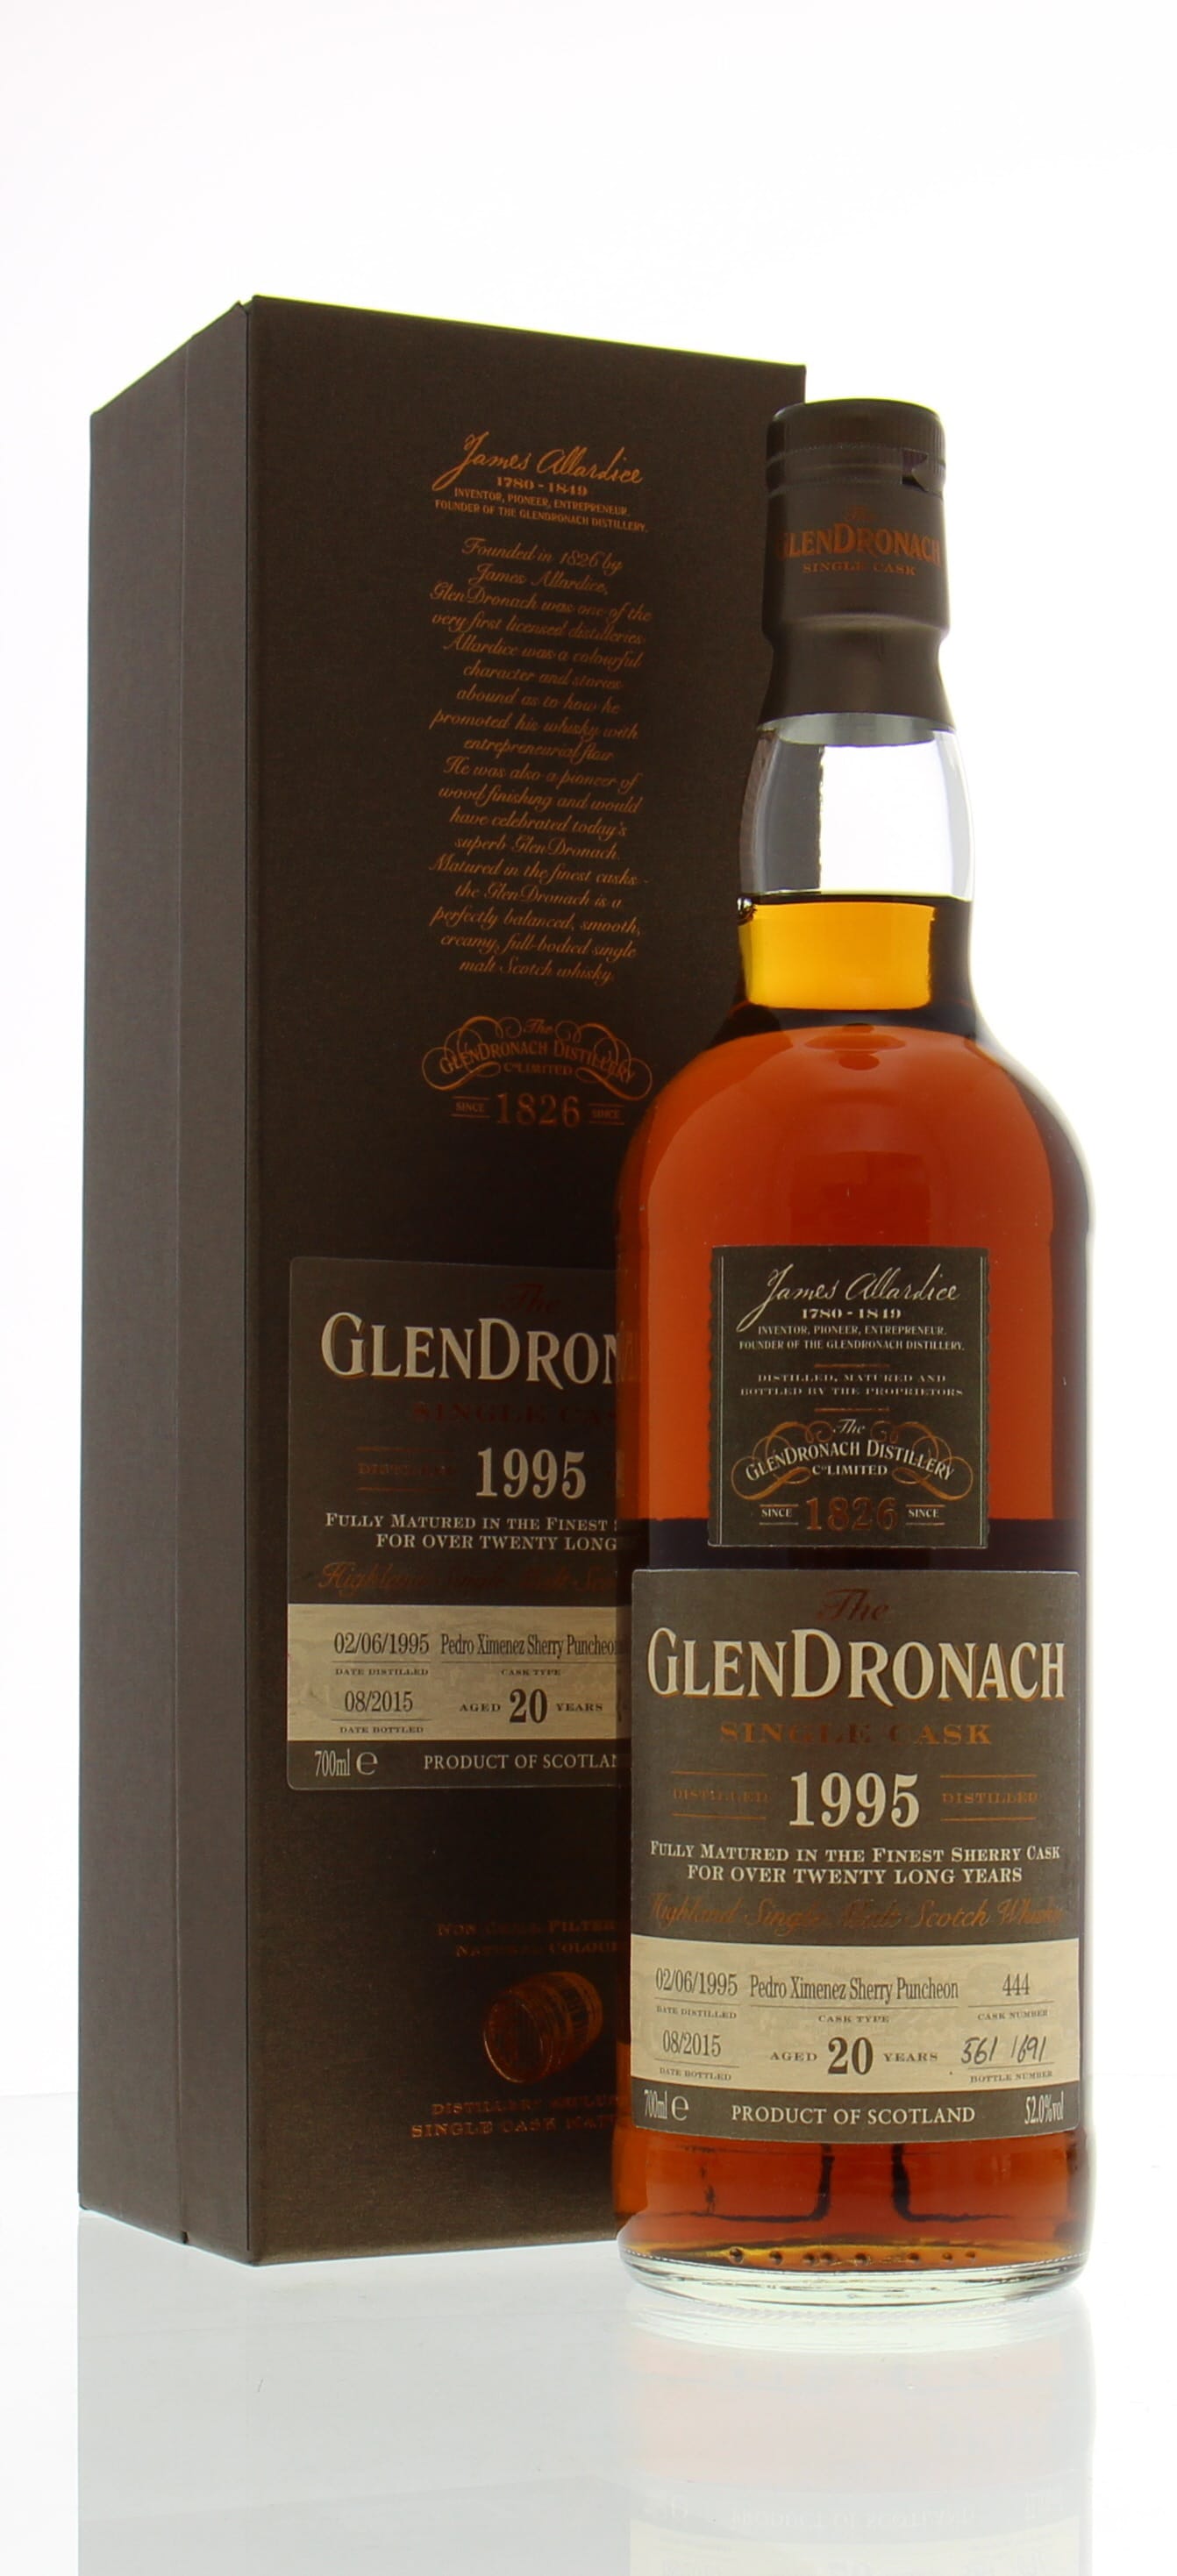 Glendronach - 20 Years Old Batch 12 Cask:444 52% 1995 In Original Container